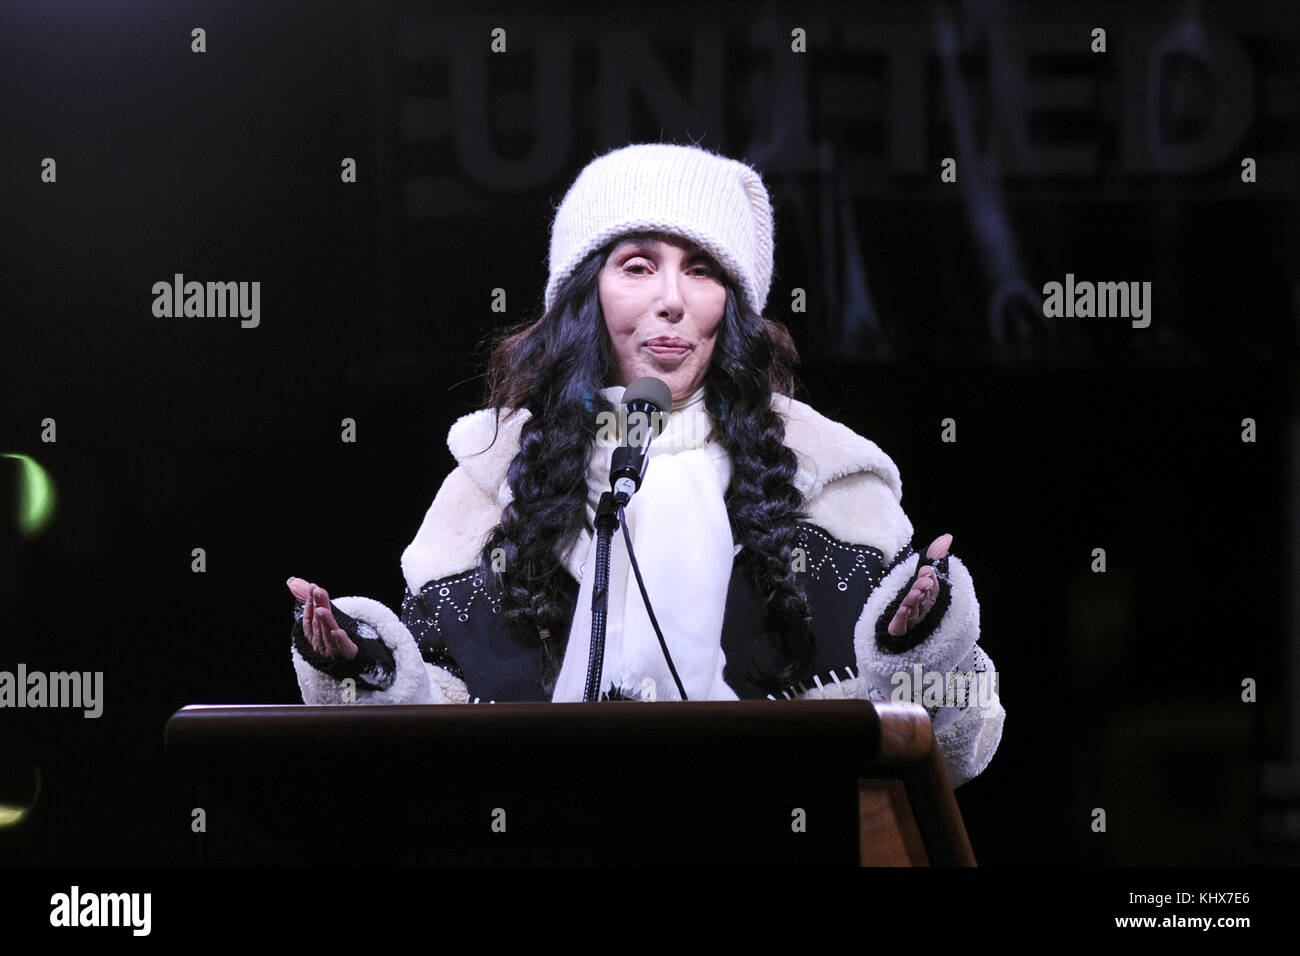 NEW YORK, NY - JANUARY 19: Cher gives a speech as people gather in front of Trump International Hotel & Tower in New York, USA on January 19, 2017 during a demonstration to protest US President-elect, Republican, Donald Trump ahead of his inauguration which will be held in Washington. Mayor of New York Bill de Blasio,Mayor of Minneapolis Betsy Hodges participate the protest as well as celebrities including Robert De Niro, Marisa Tomei, Sally Field, Alec Baldwin, Mark Ruffalo, Cynthia Nixon, Michael Moore, Cher, Natalie Merchant   People:  Cher Stock Photo